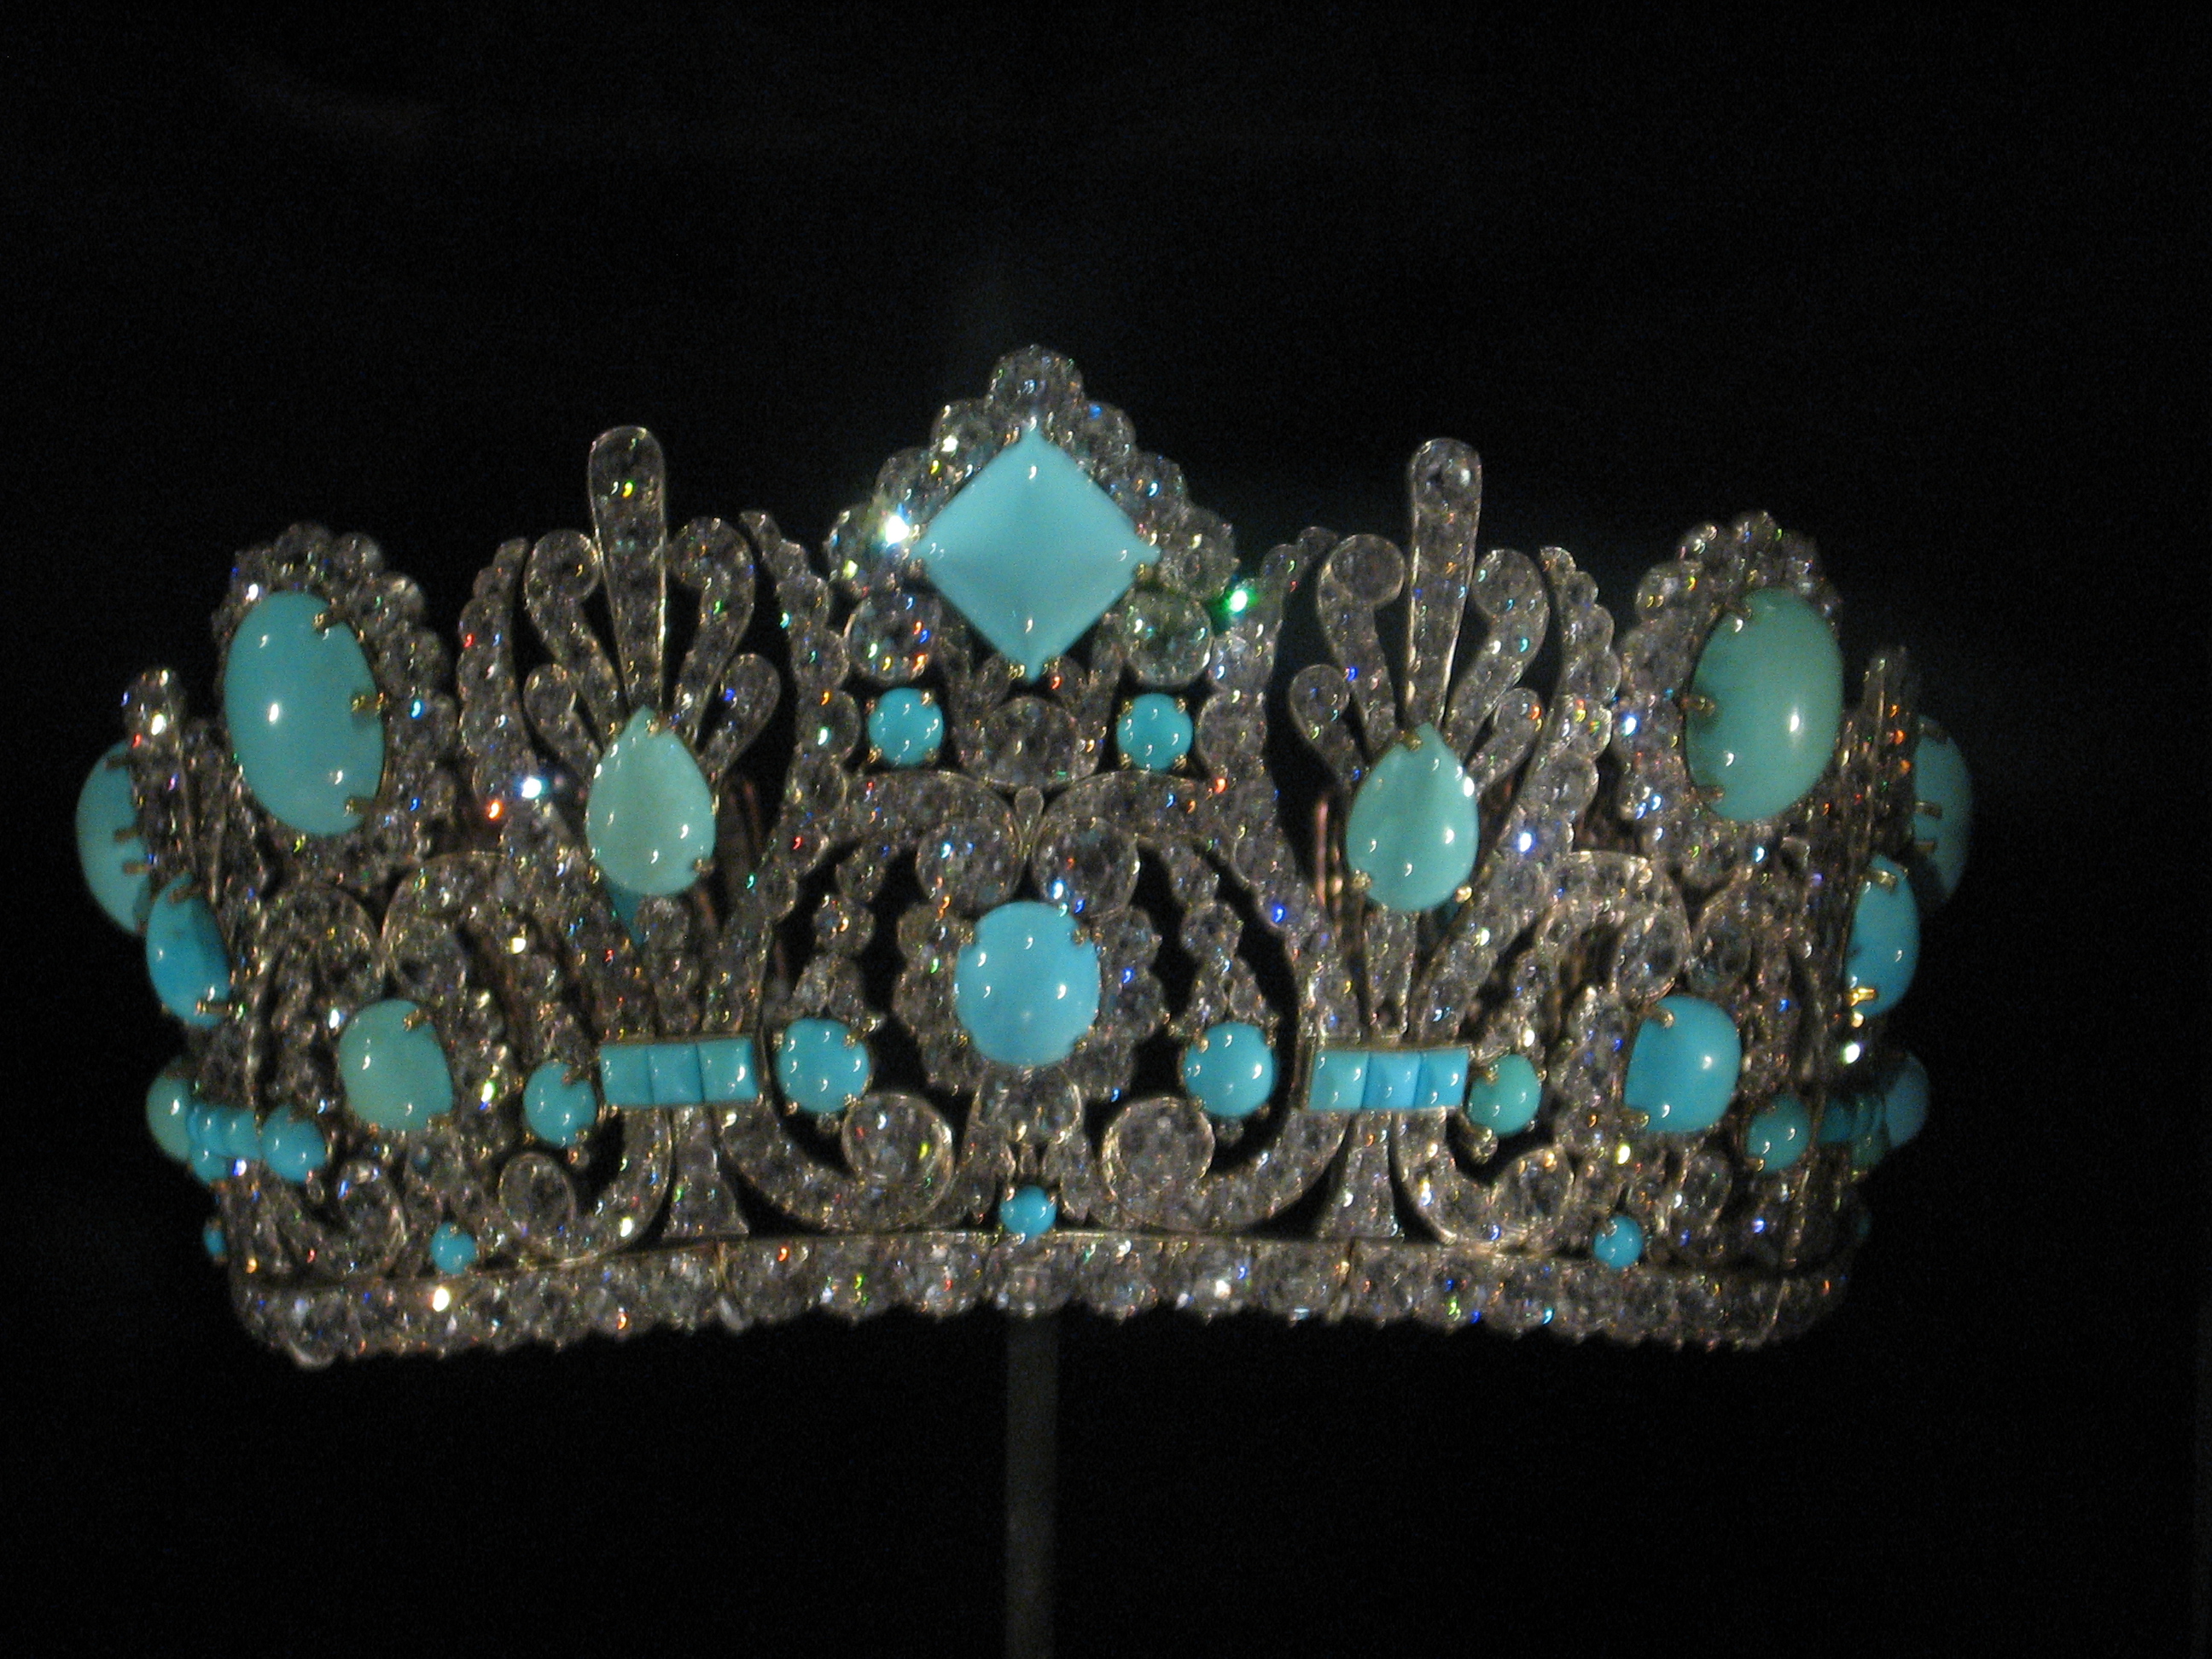 http://upload.wikimedia.org/wikipedia/commons/a/a4/The_Marie_Louise's_diadem.JPG